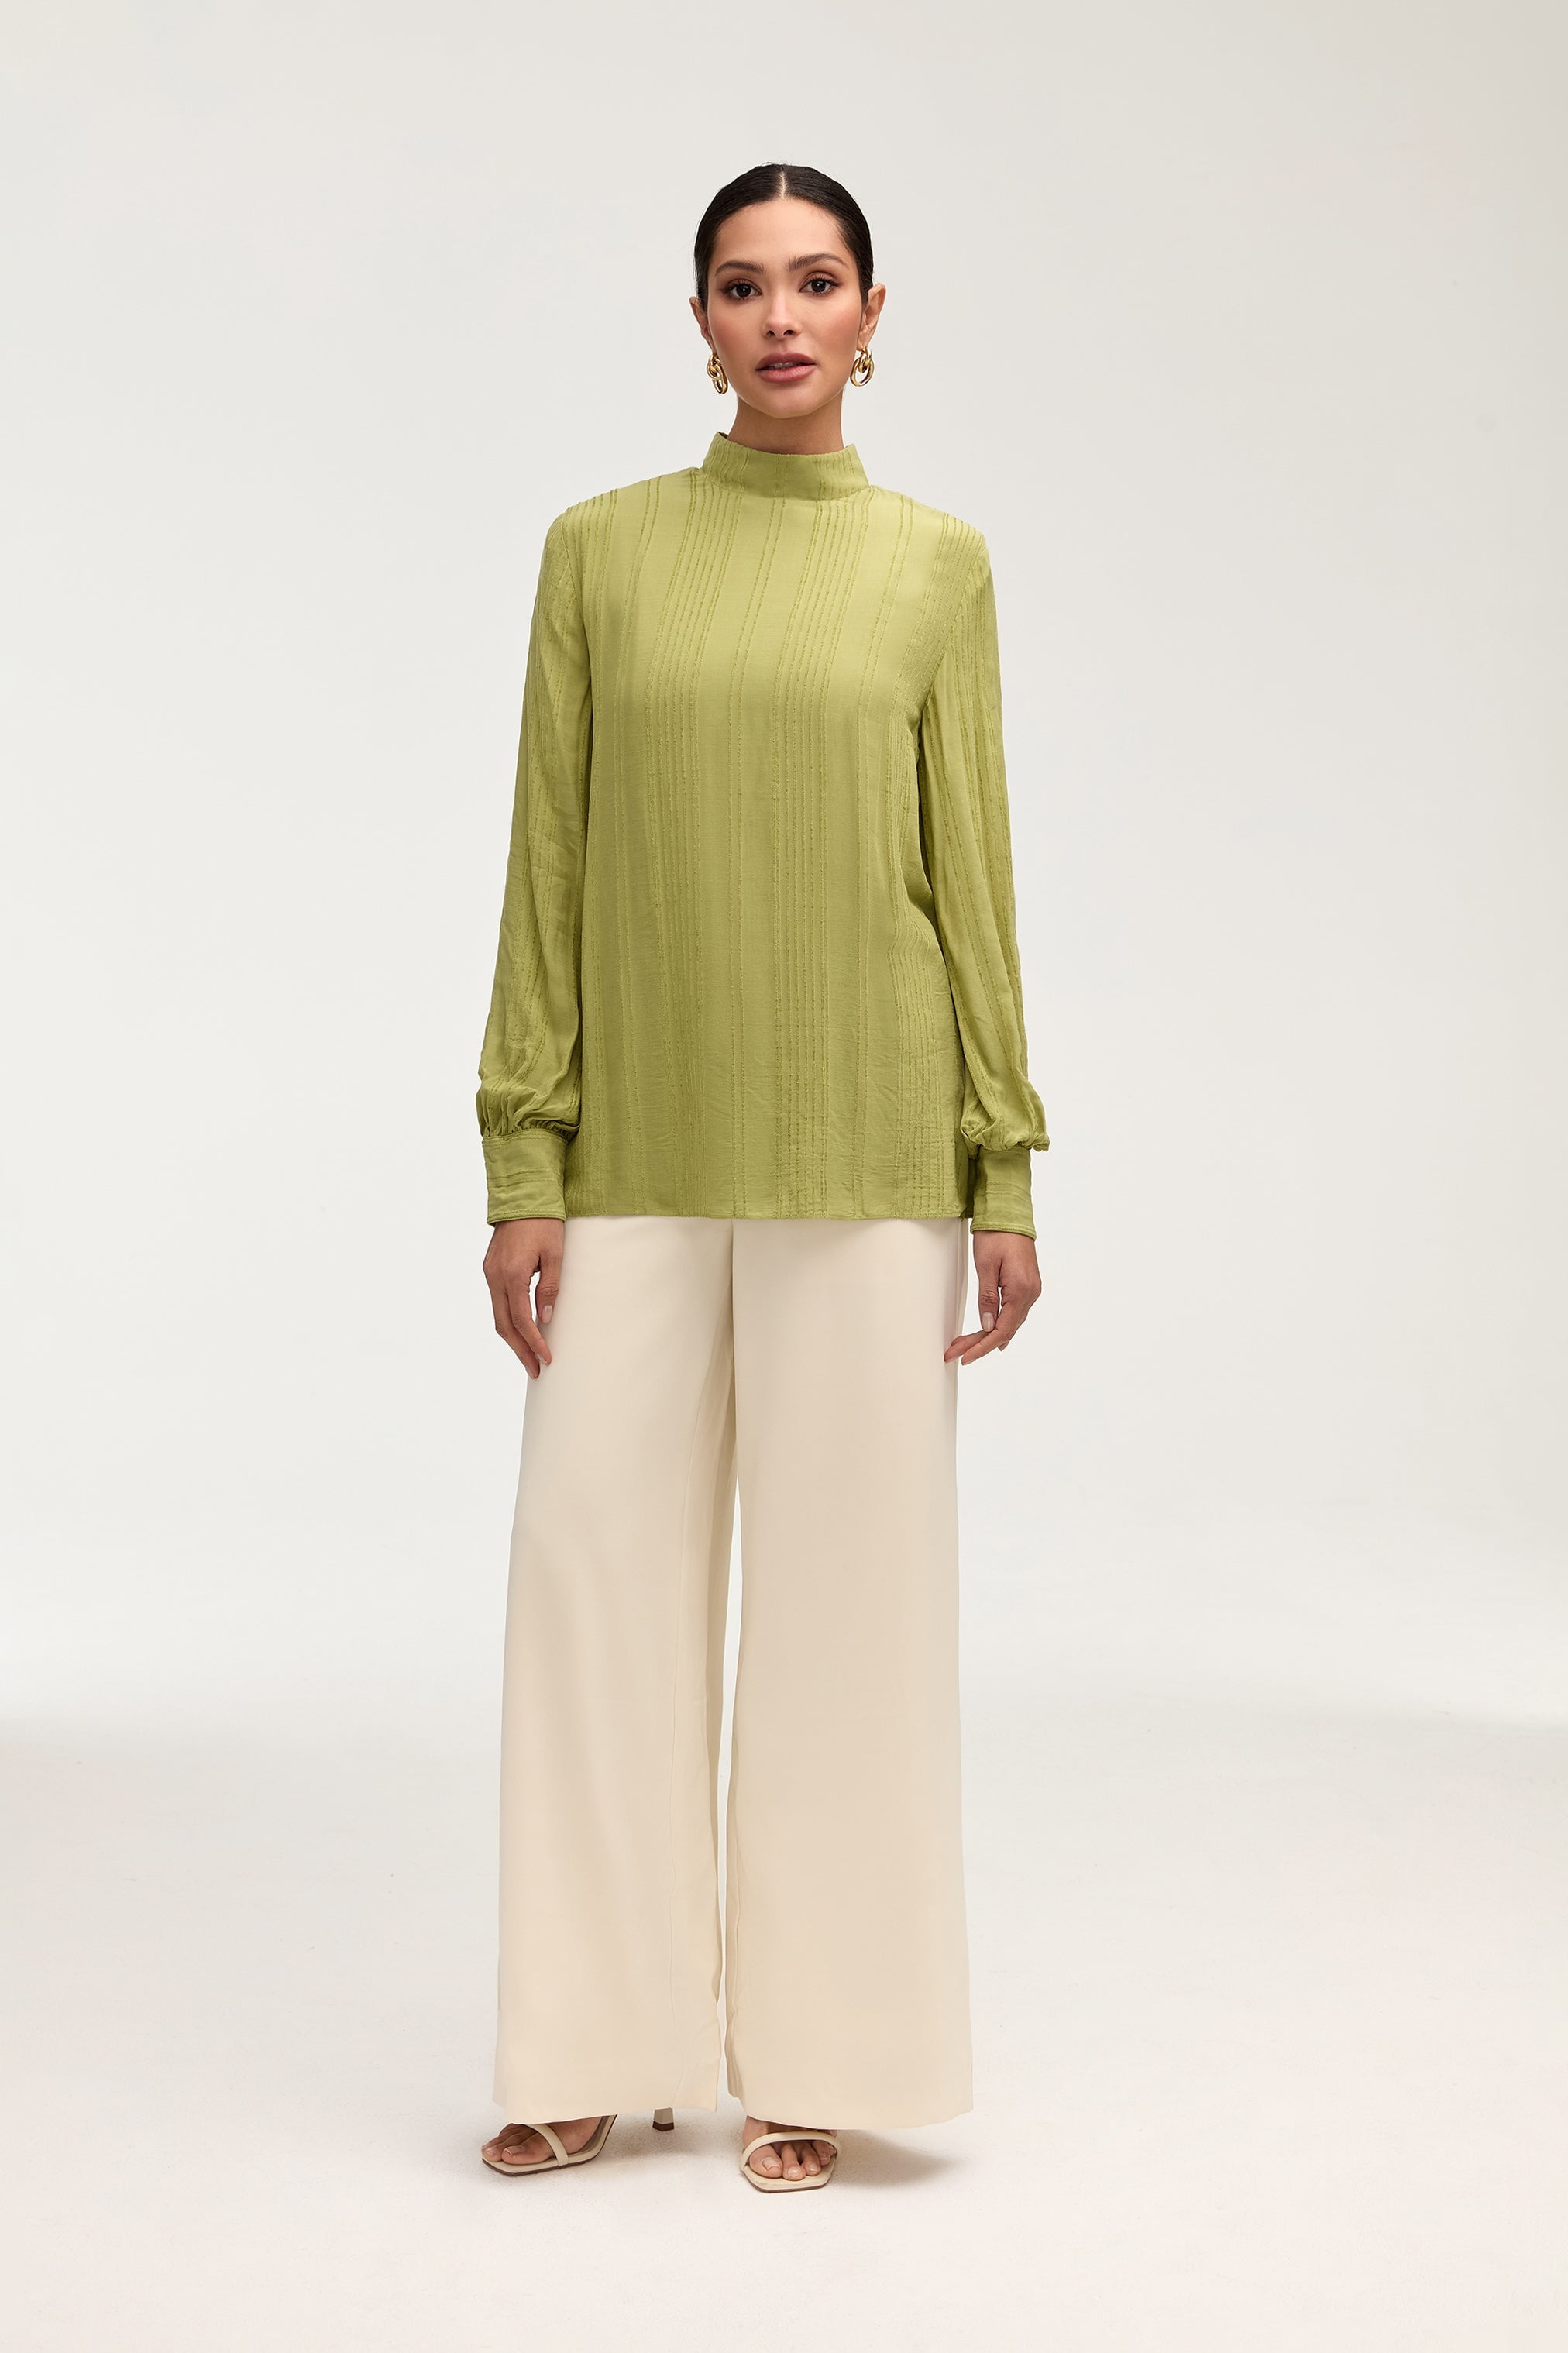 Textured Rayon Balloon Sleeve Blouse - Fern Green Tops Veiled Collection 